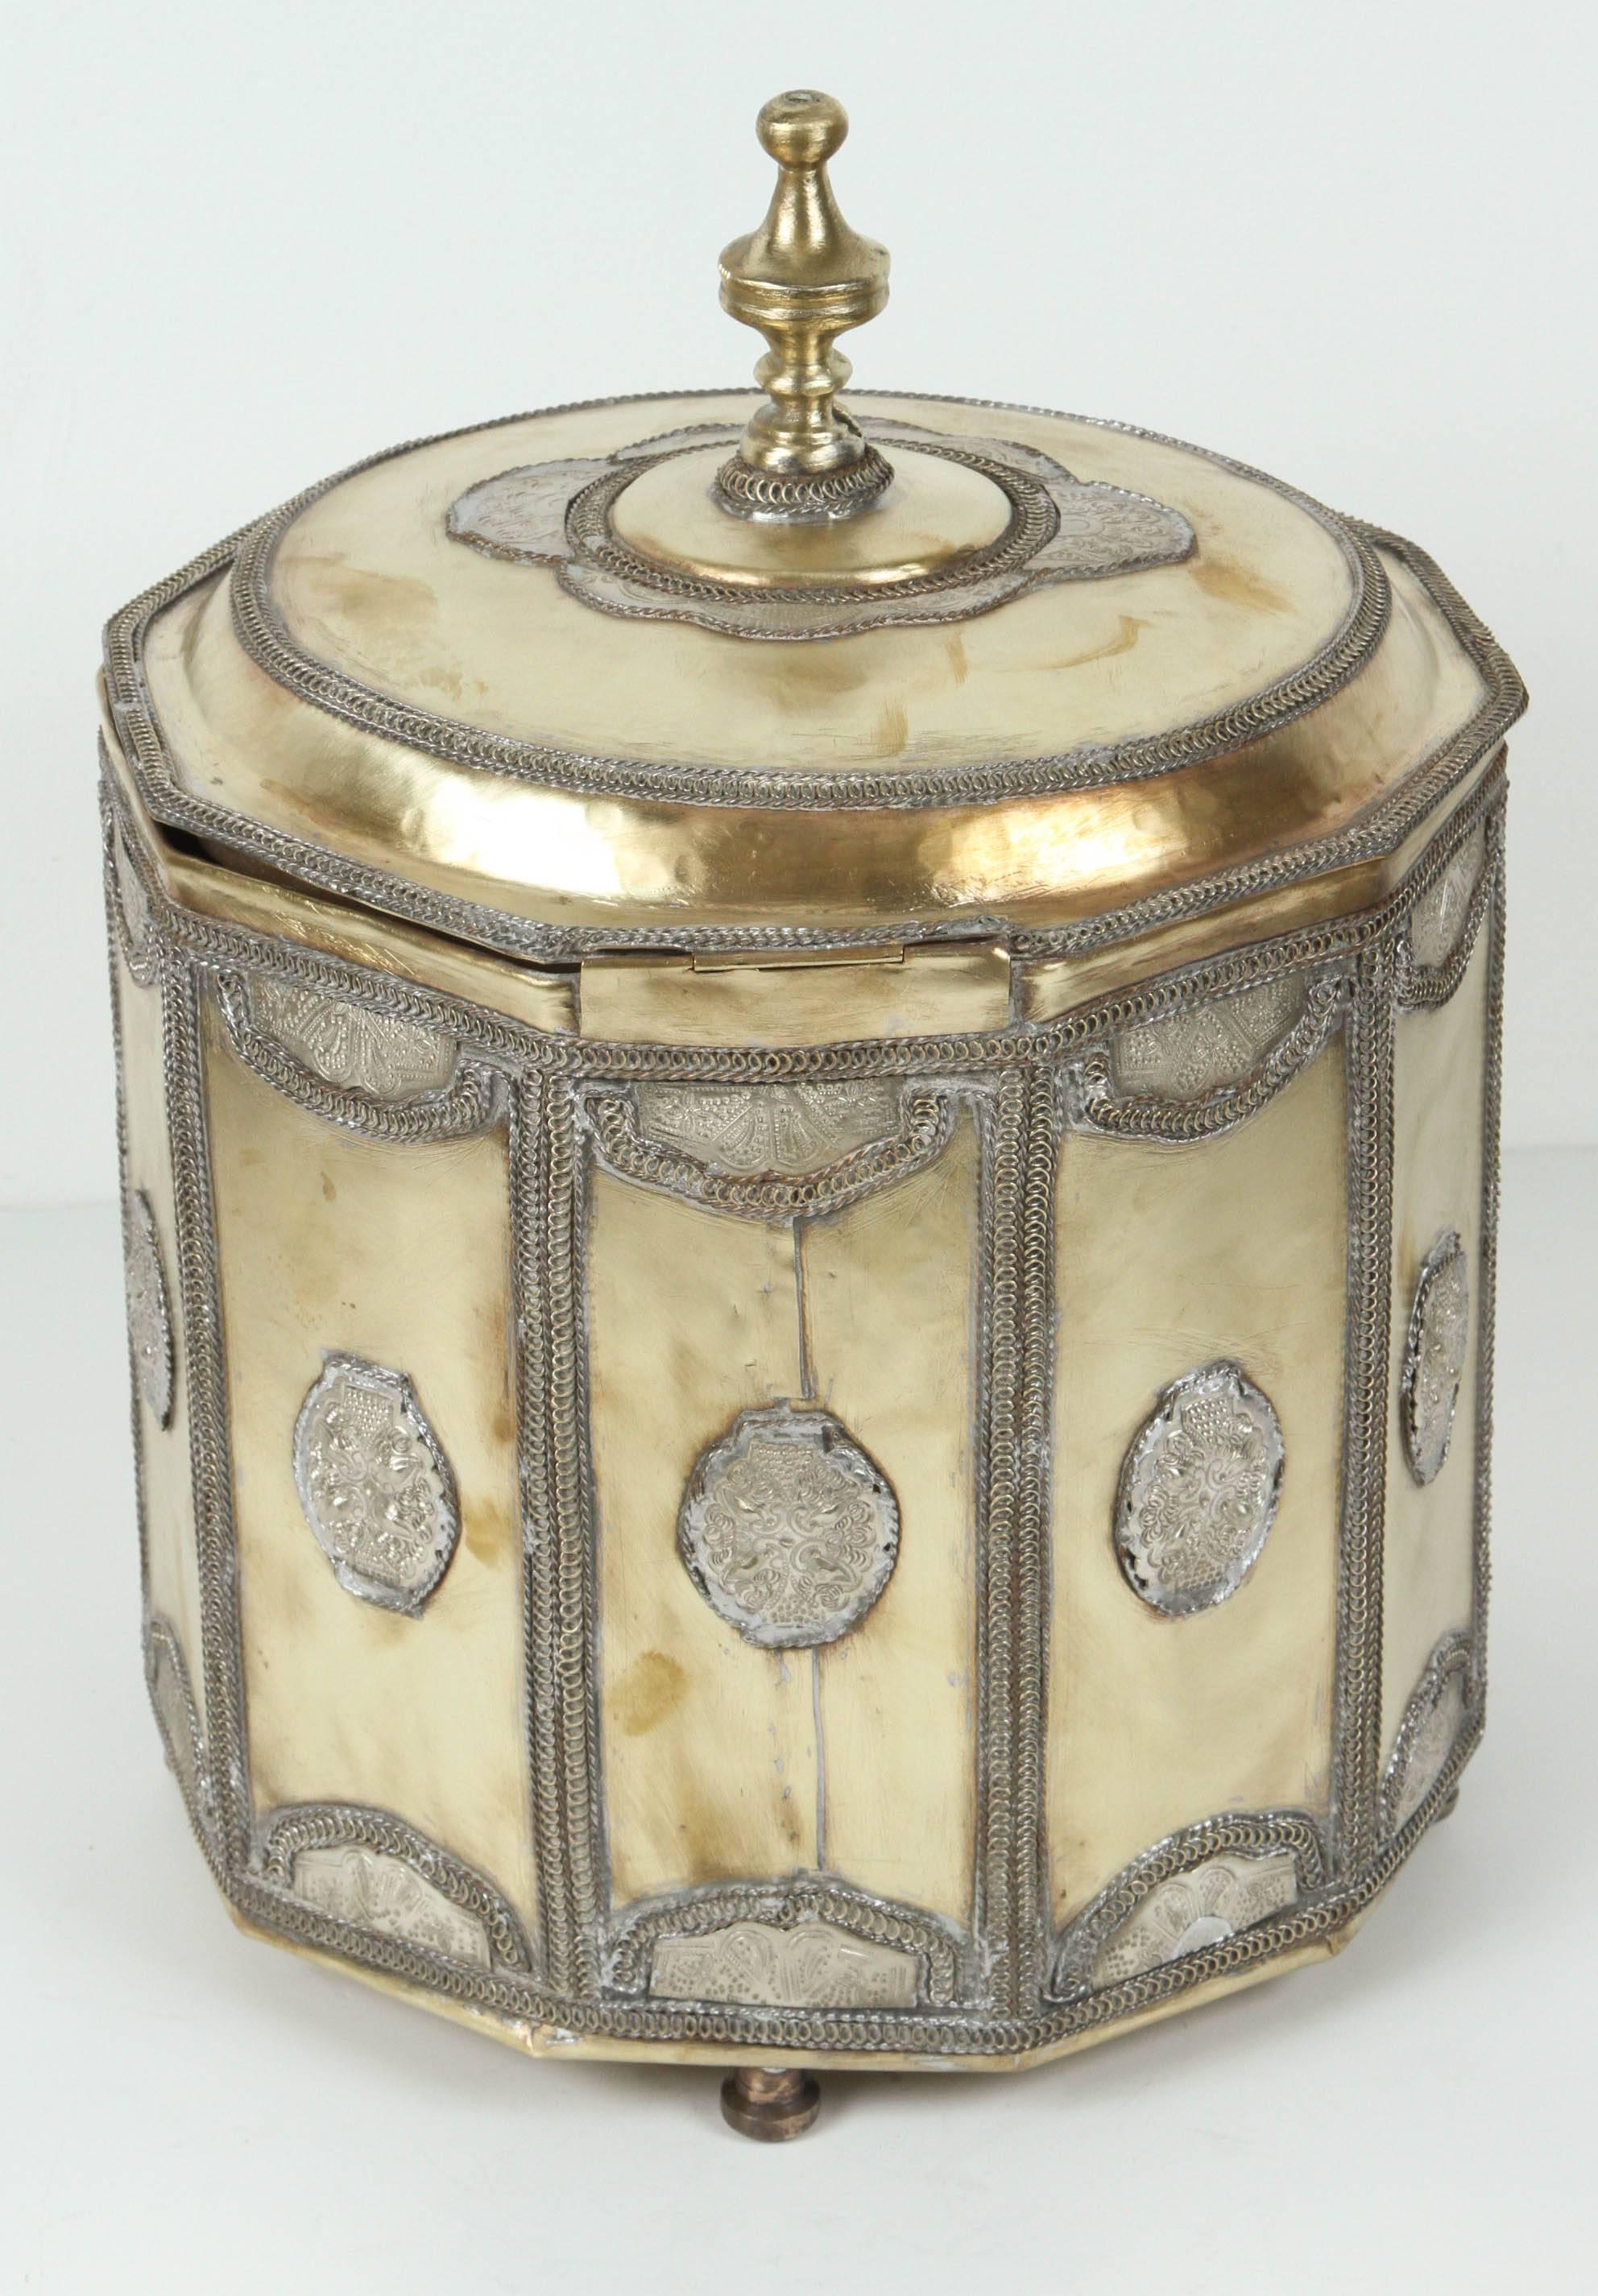 20th Century Large Brass Moroccan Cookie Jar with Silver Filigree Designs